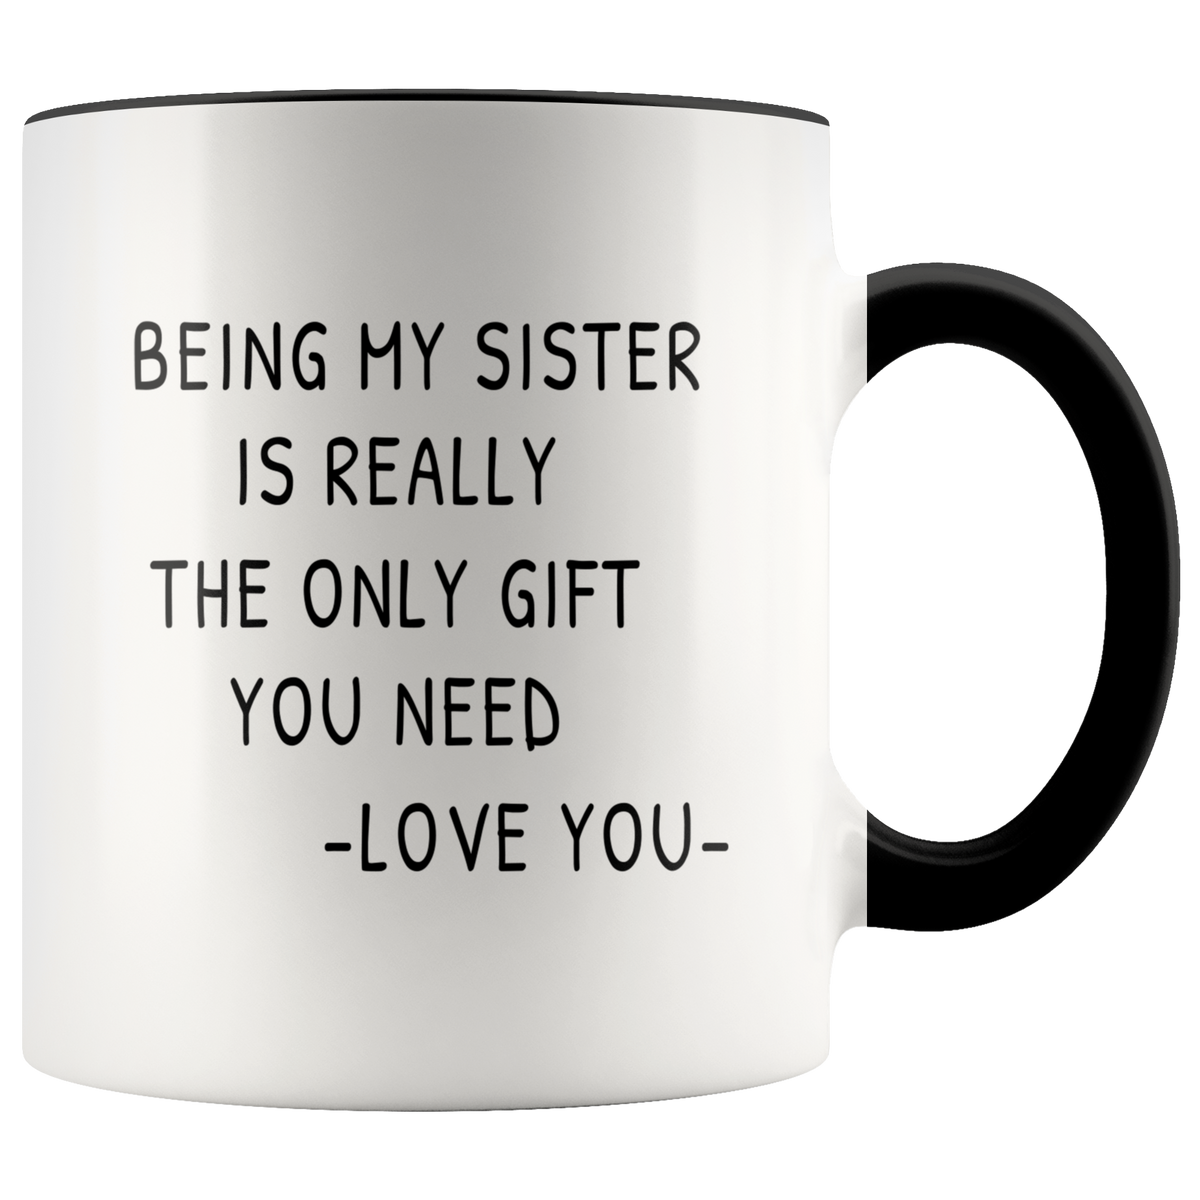 Funny Gag Gift For Sister - Being My Sister Is Really The Only Gift You Need Accent Coffee Mug 11oz